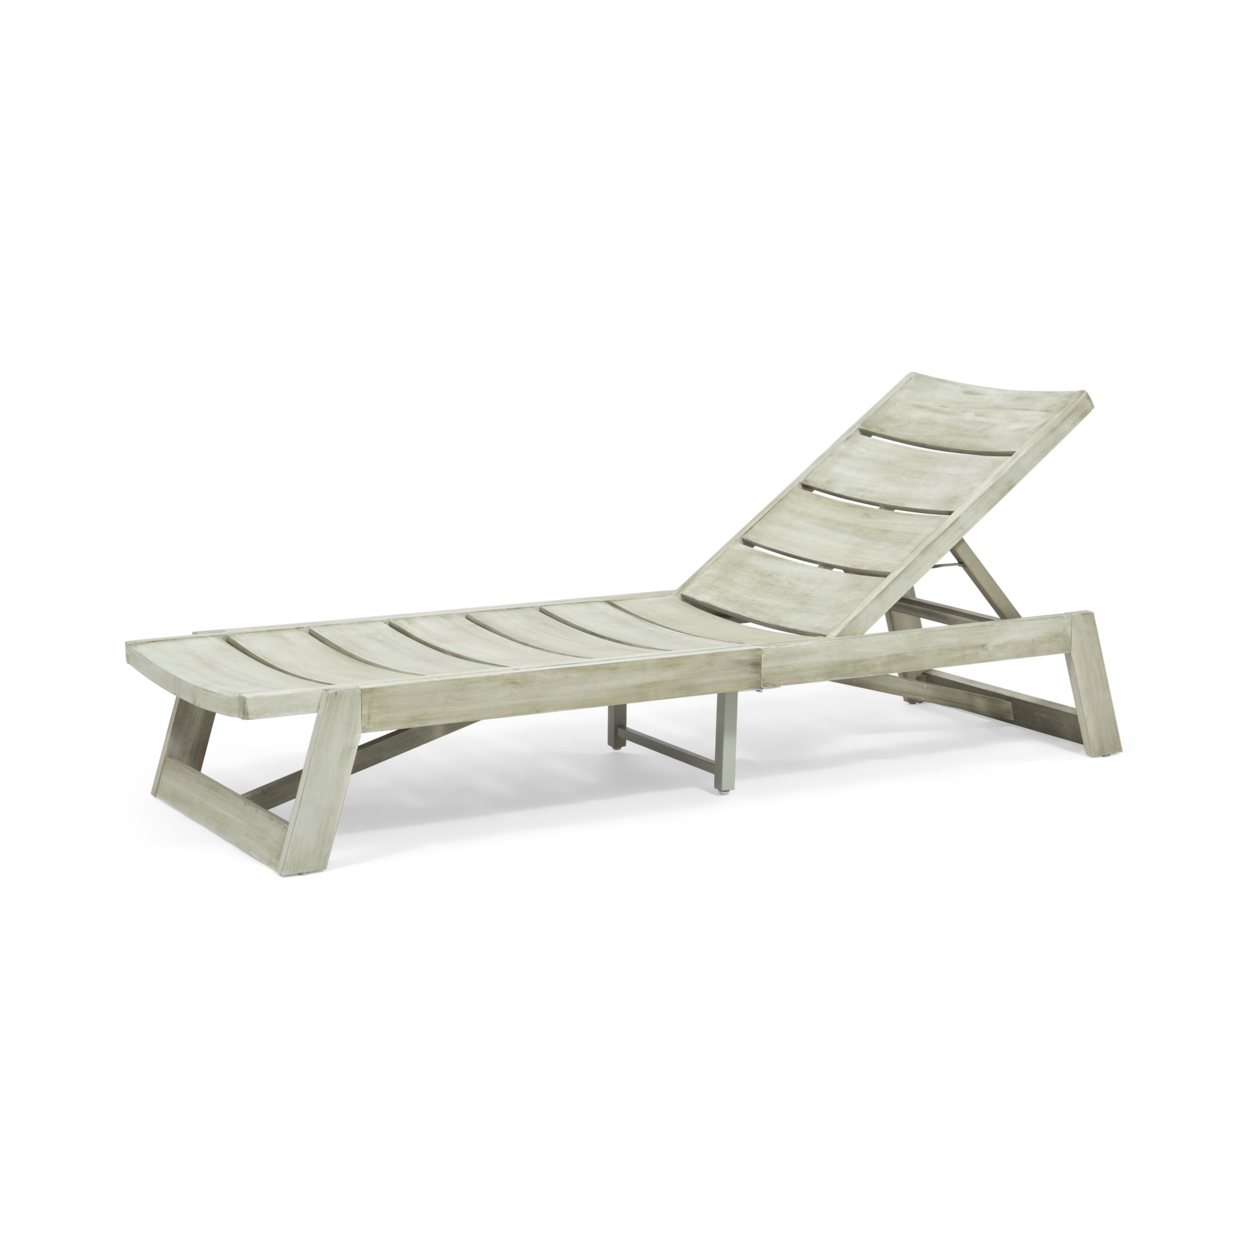 Lillian Outdoor Wood And Iron Chaise Lounge - Light Gray Wash, Gray